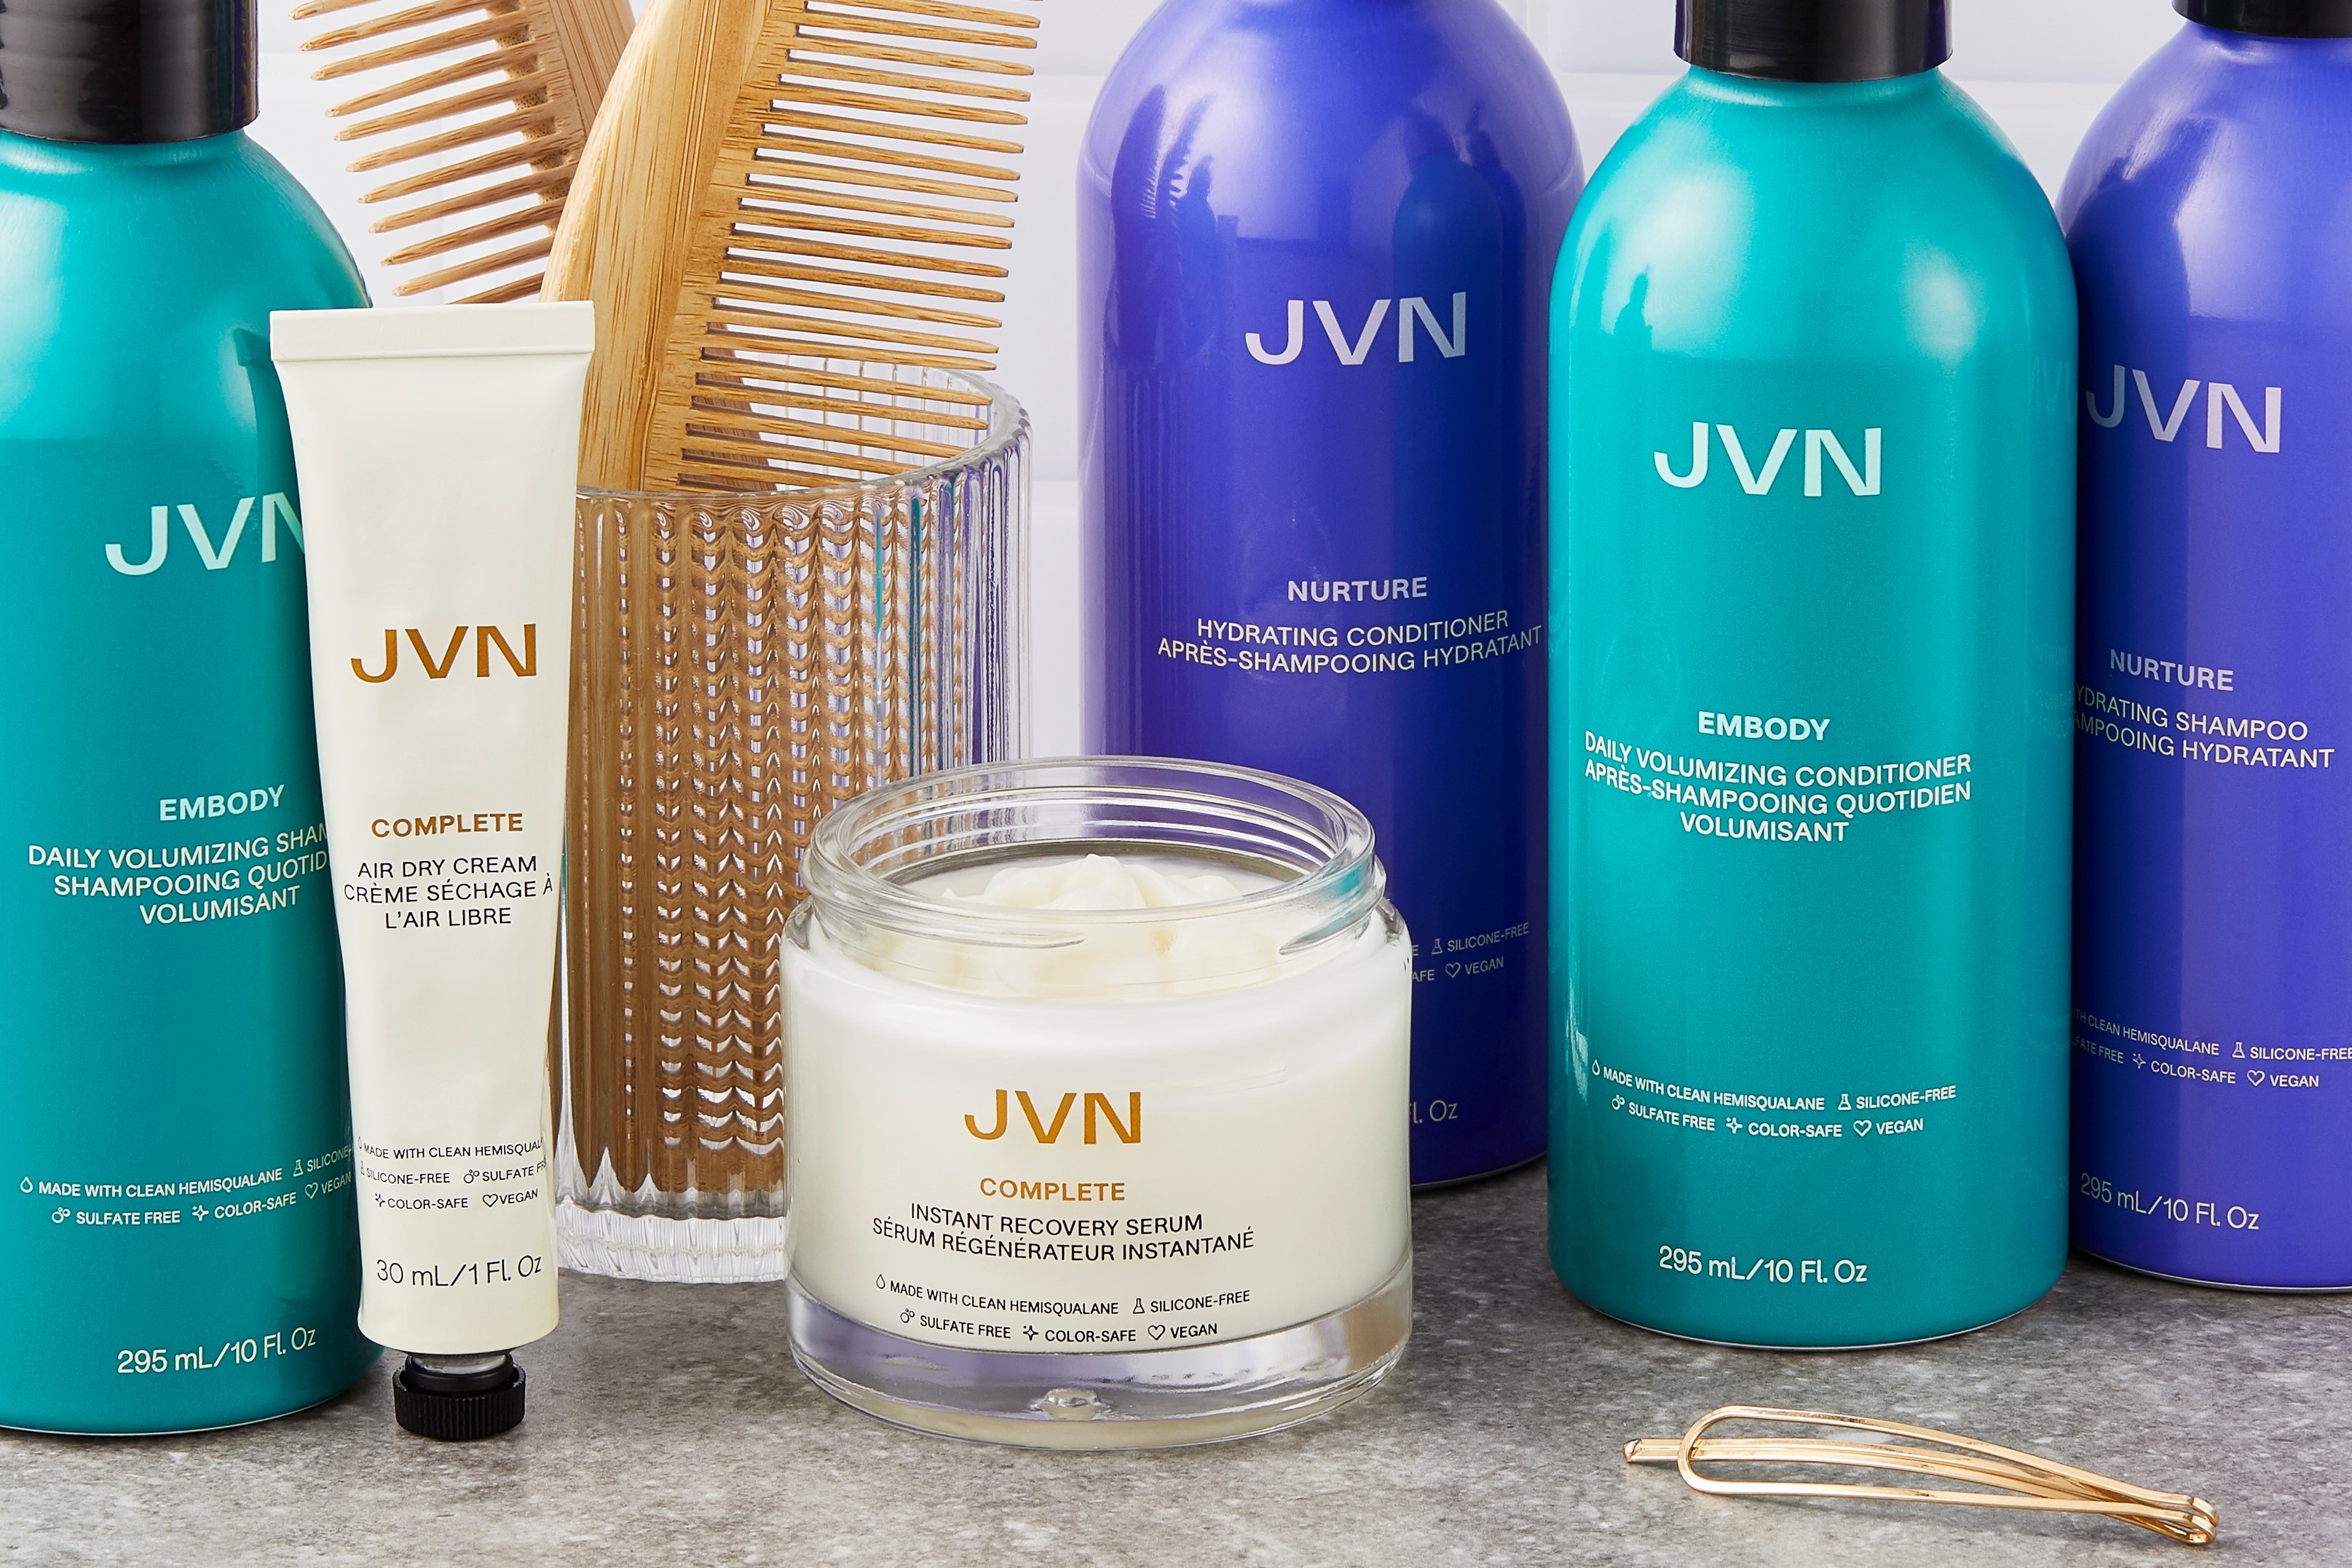 The Jonathan Van Ness JVN Haircare Review Is In